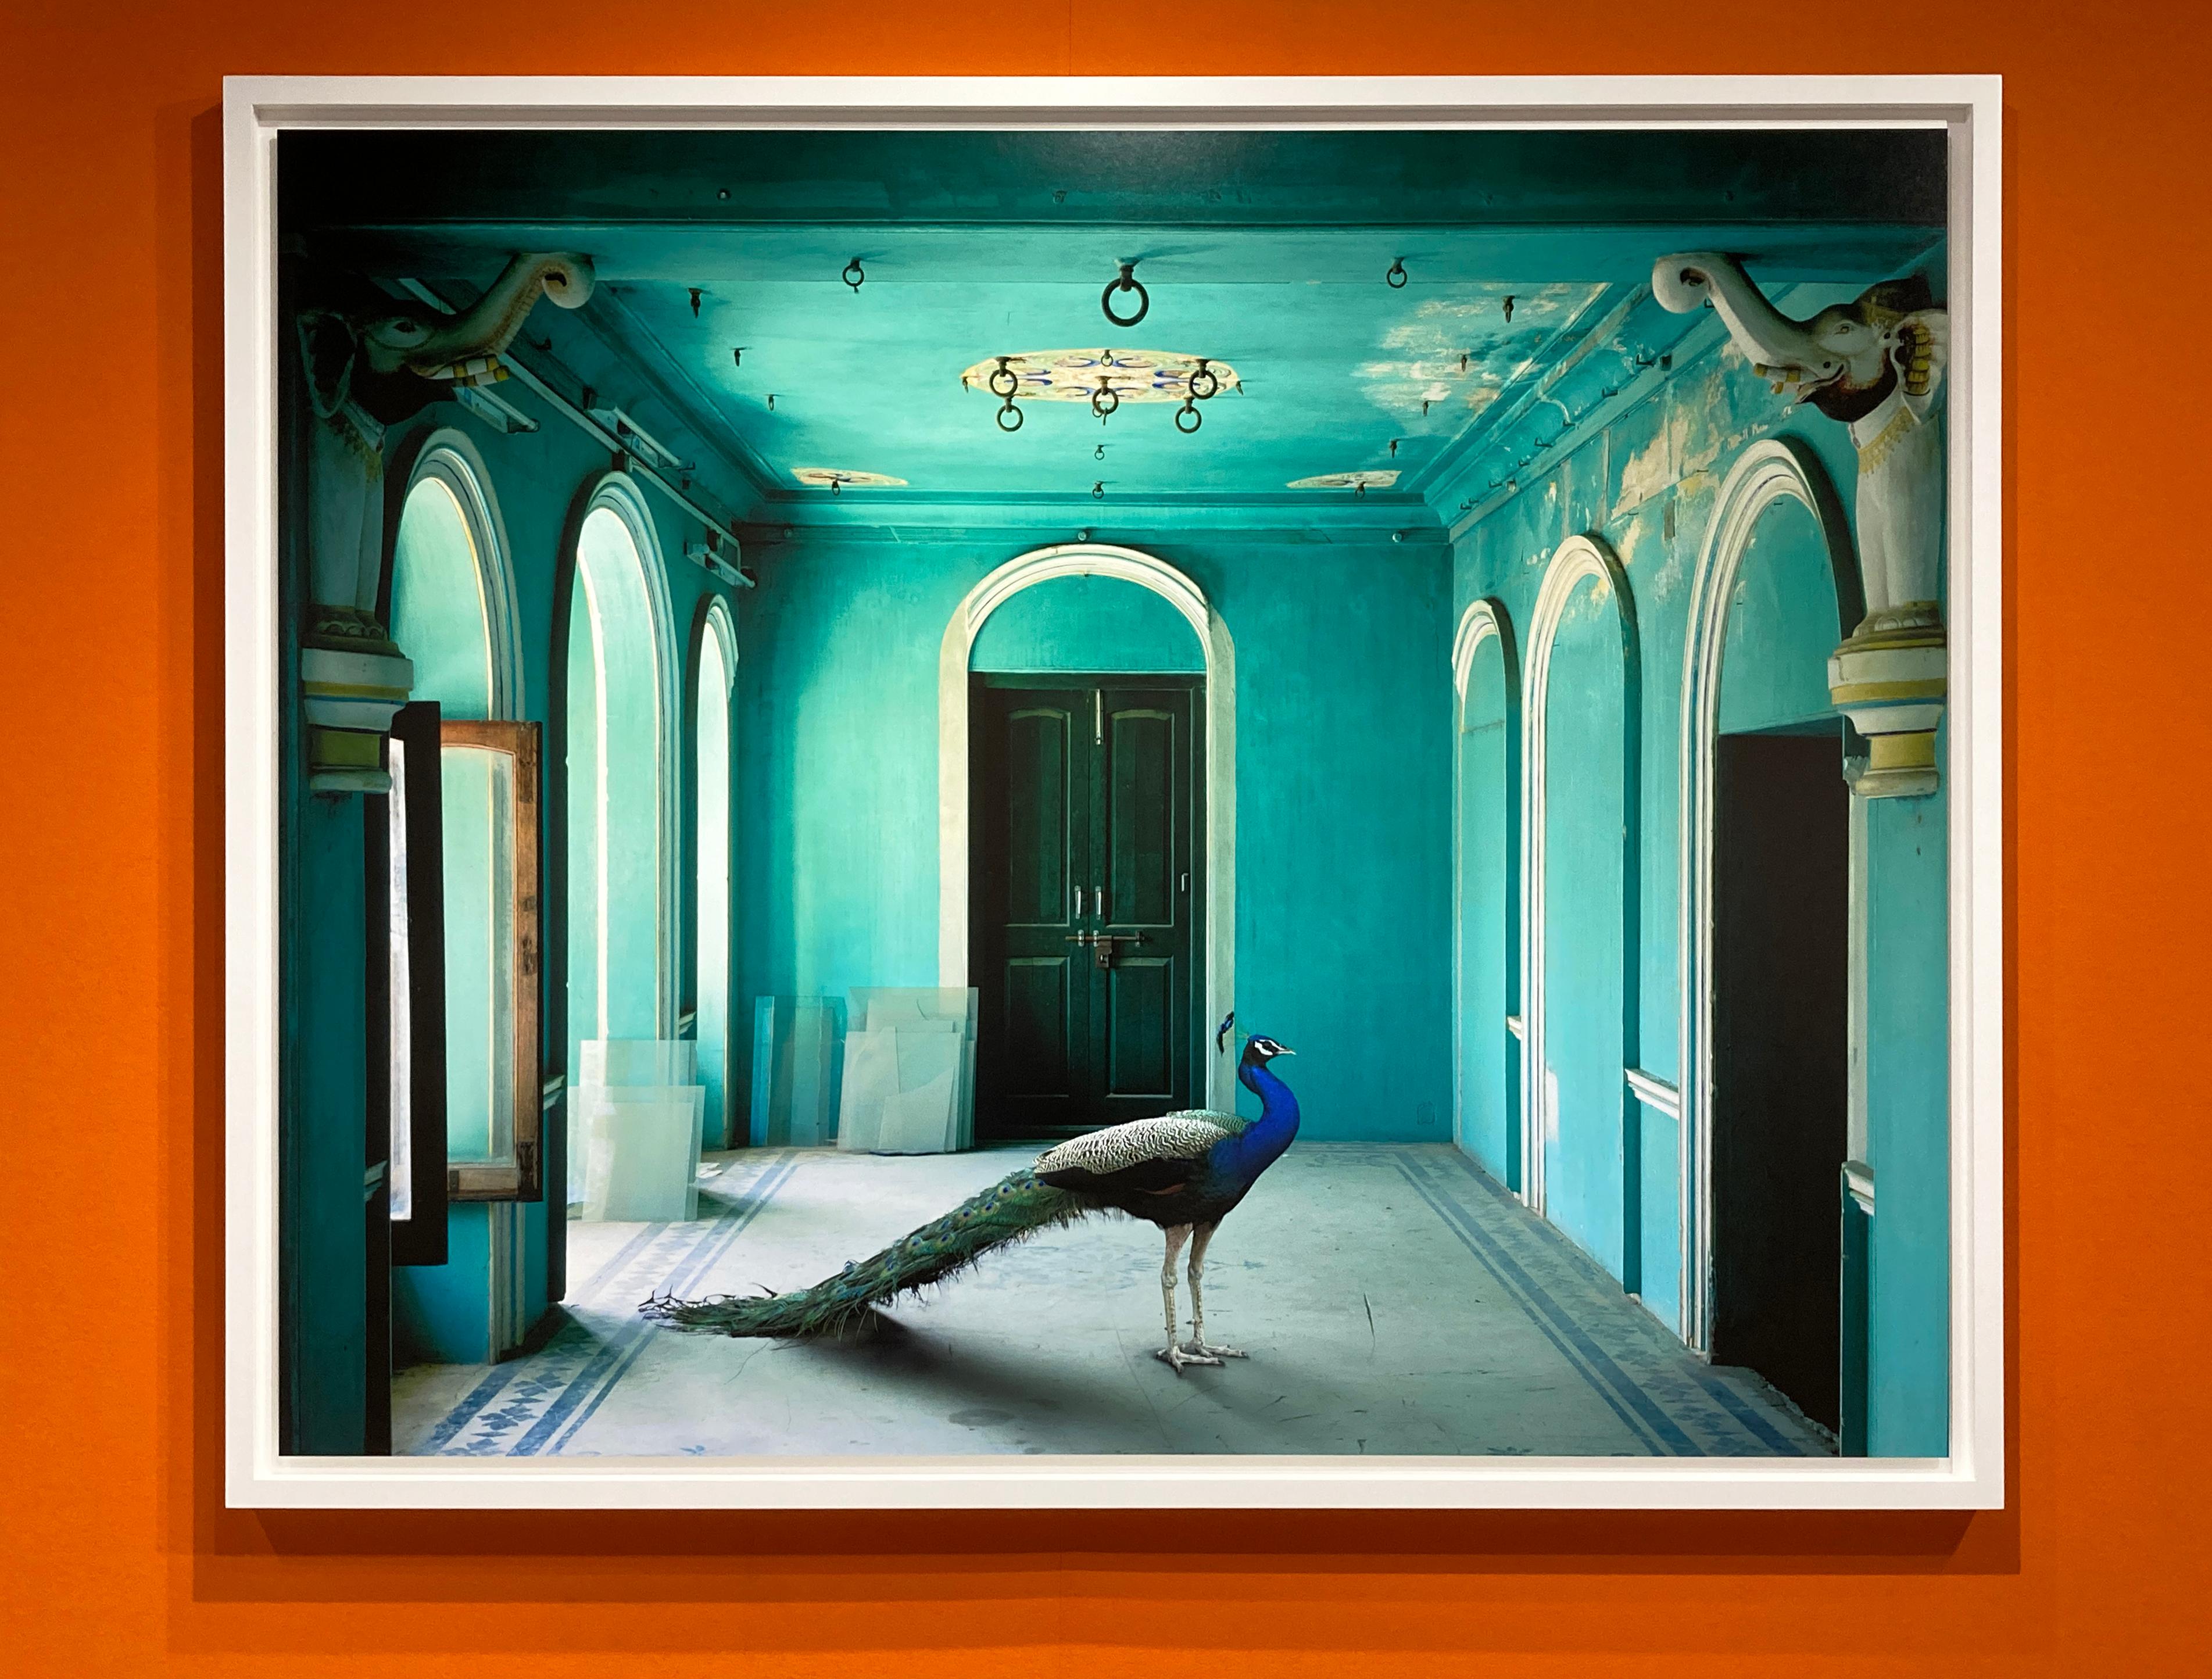 The Queen’s Room, Zanana, Udaipur City Palace, 2010 - Photograph by Karen Knorr